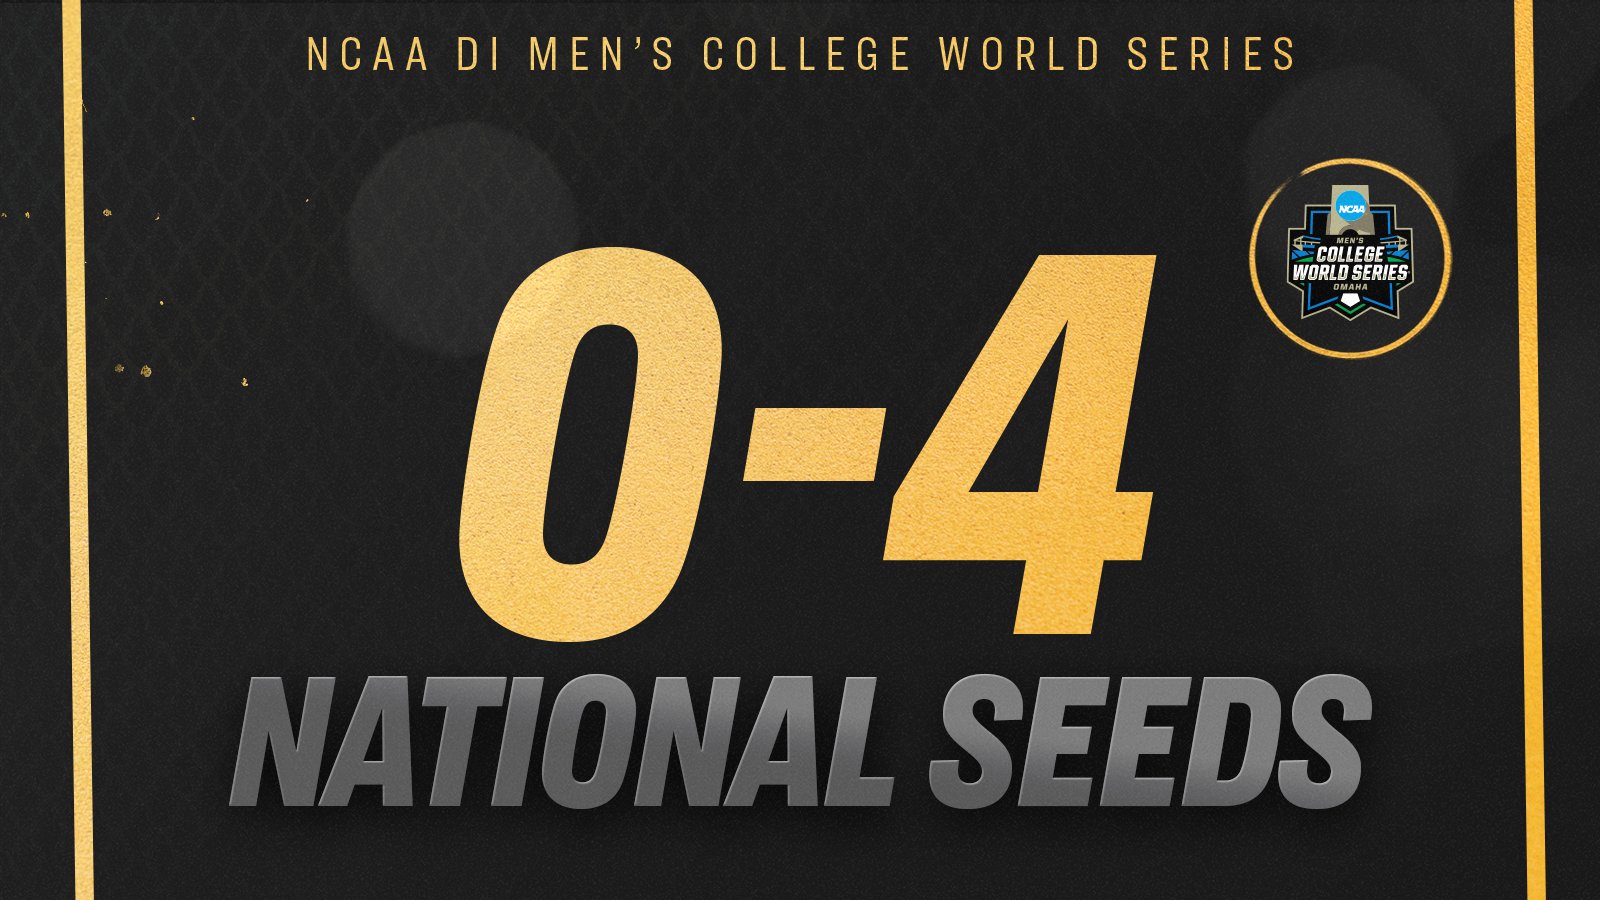 NCAA Baseball on Twitter "The National Seeds are a combined 04 to